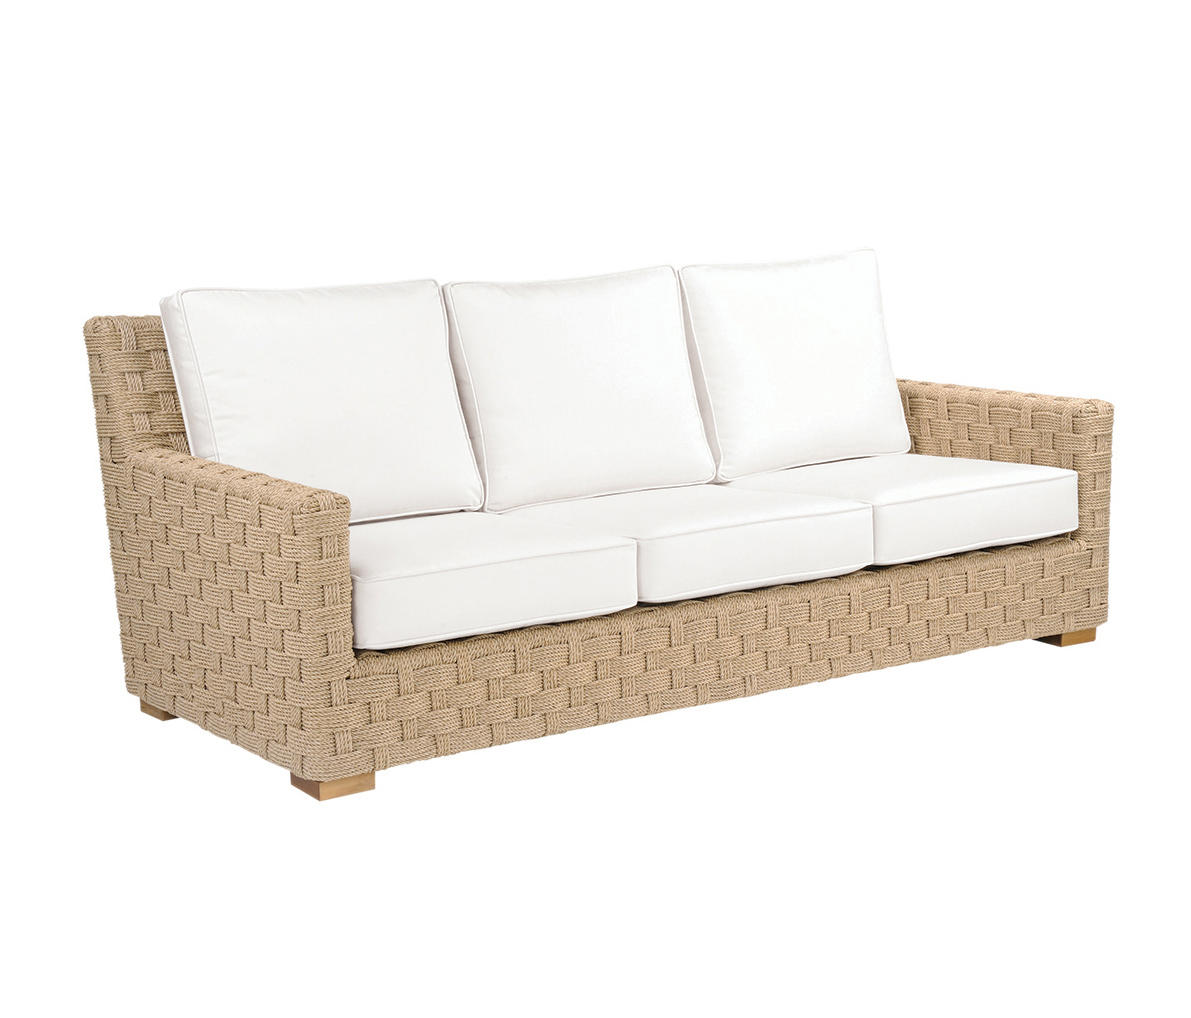 ST. BARTS SOFA - Sofas from Kingsley Bate | Architonic